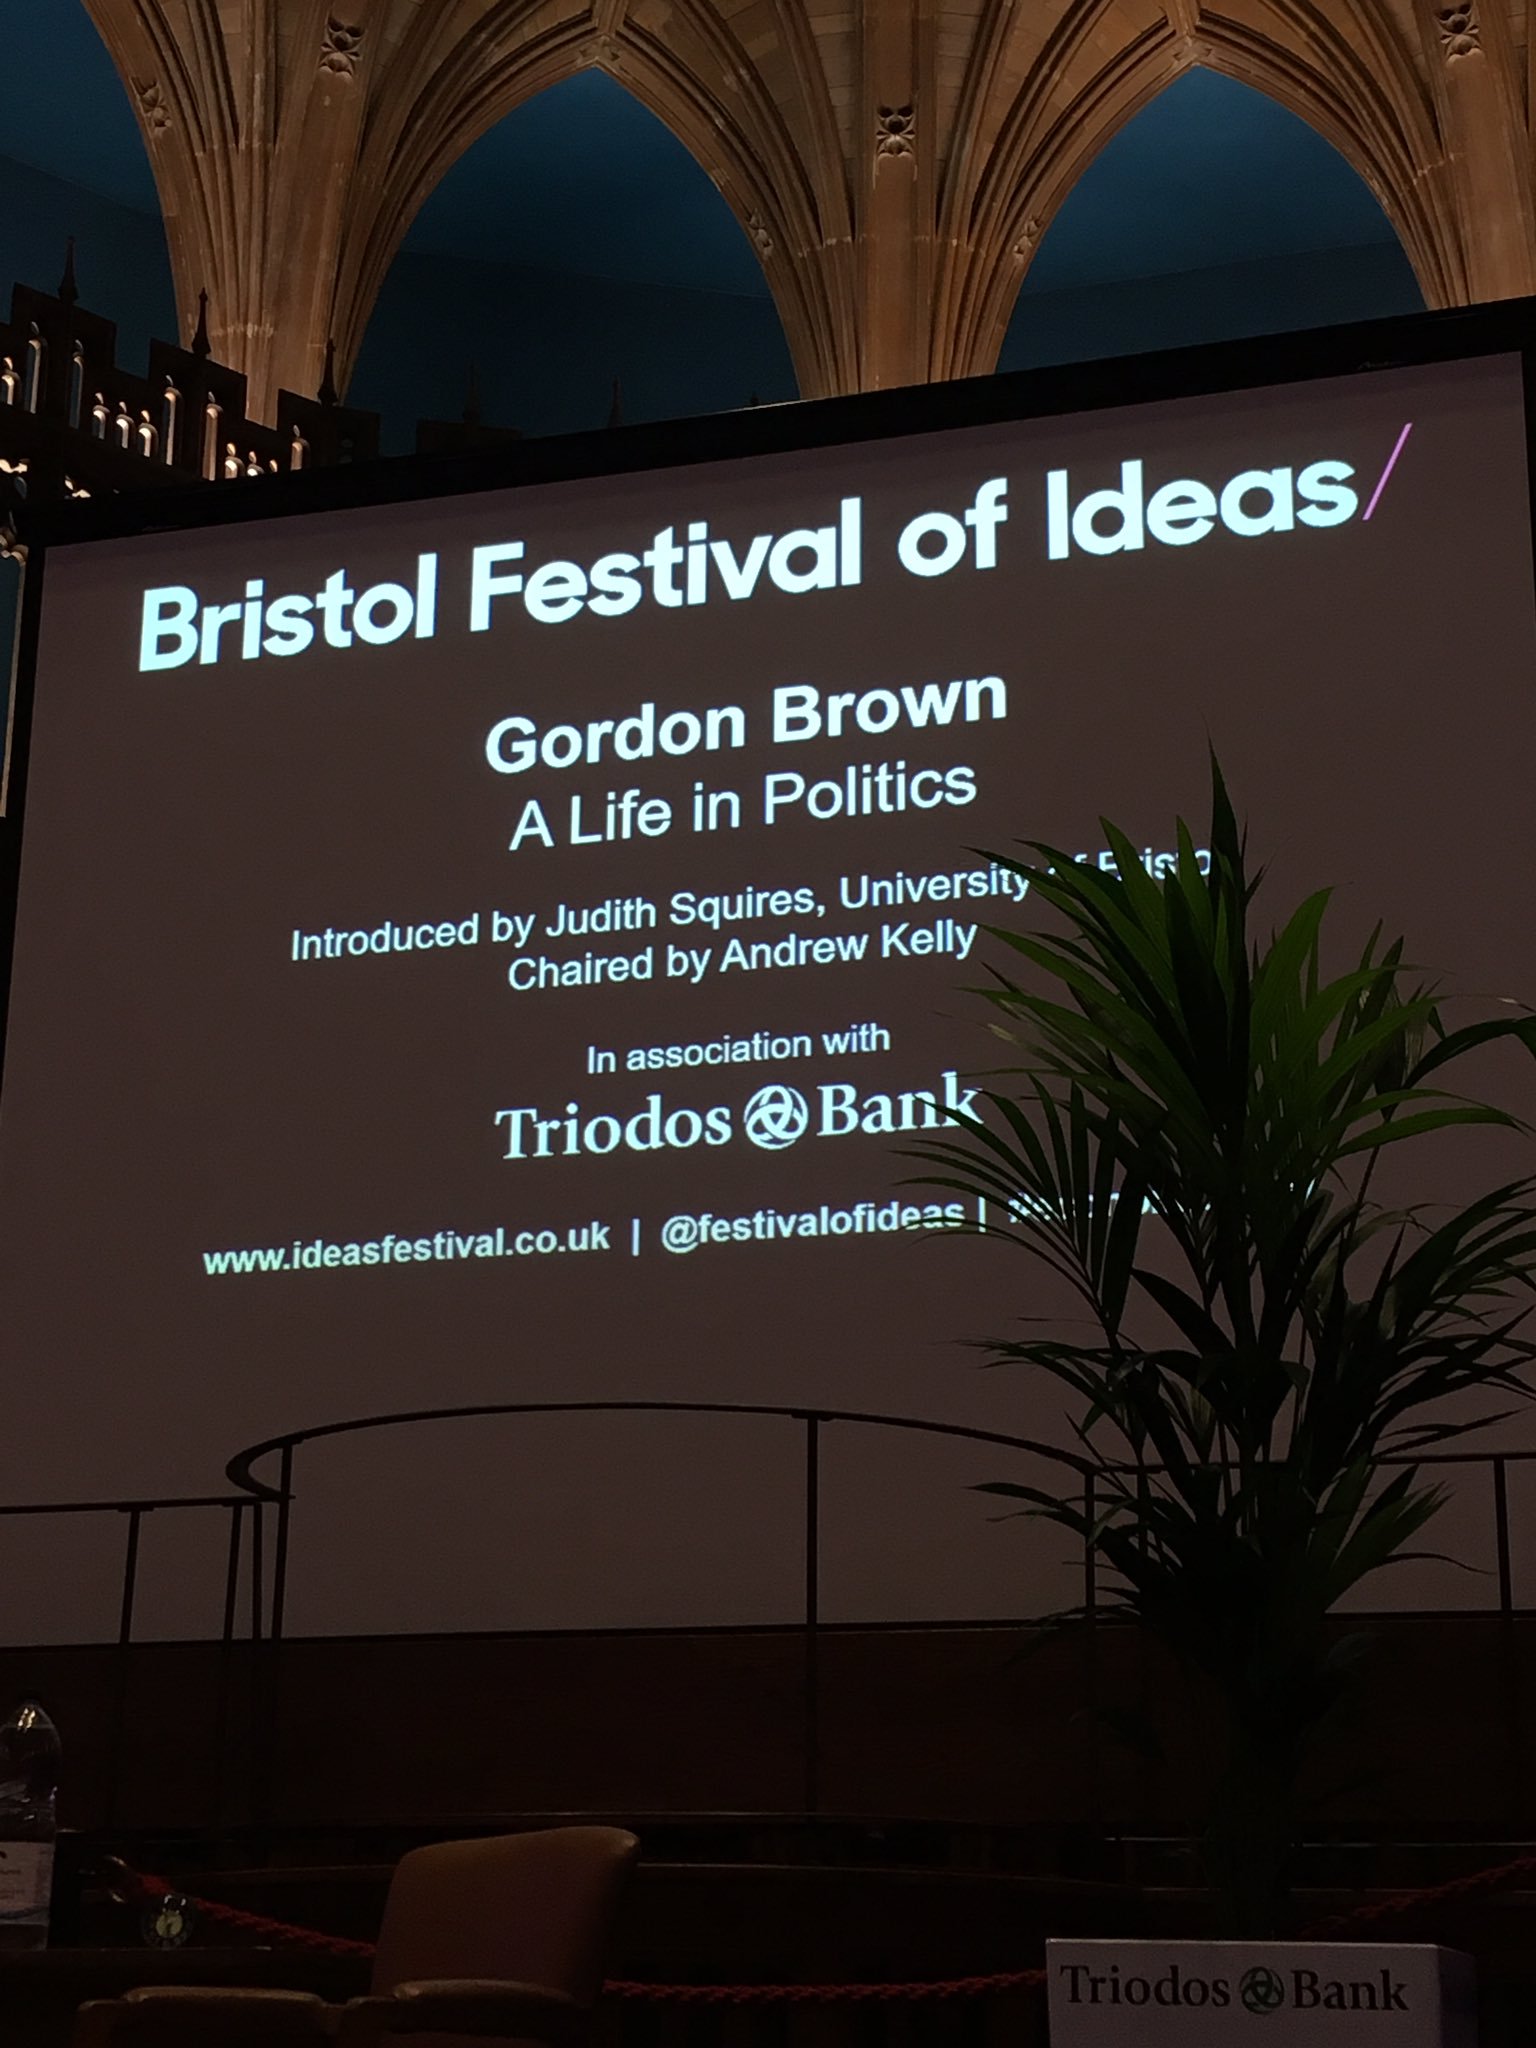 @OfficeGSBrown Excited to be at the Will's Building #Bristol to see Gordon Brown speak at #economicsfest @FestivalofIdeas #bestseatsinthehouse https://t.co/PtmOUP96pQ